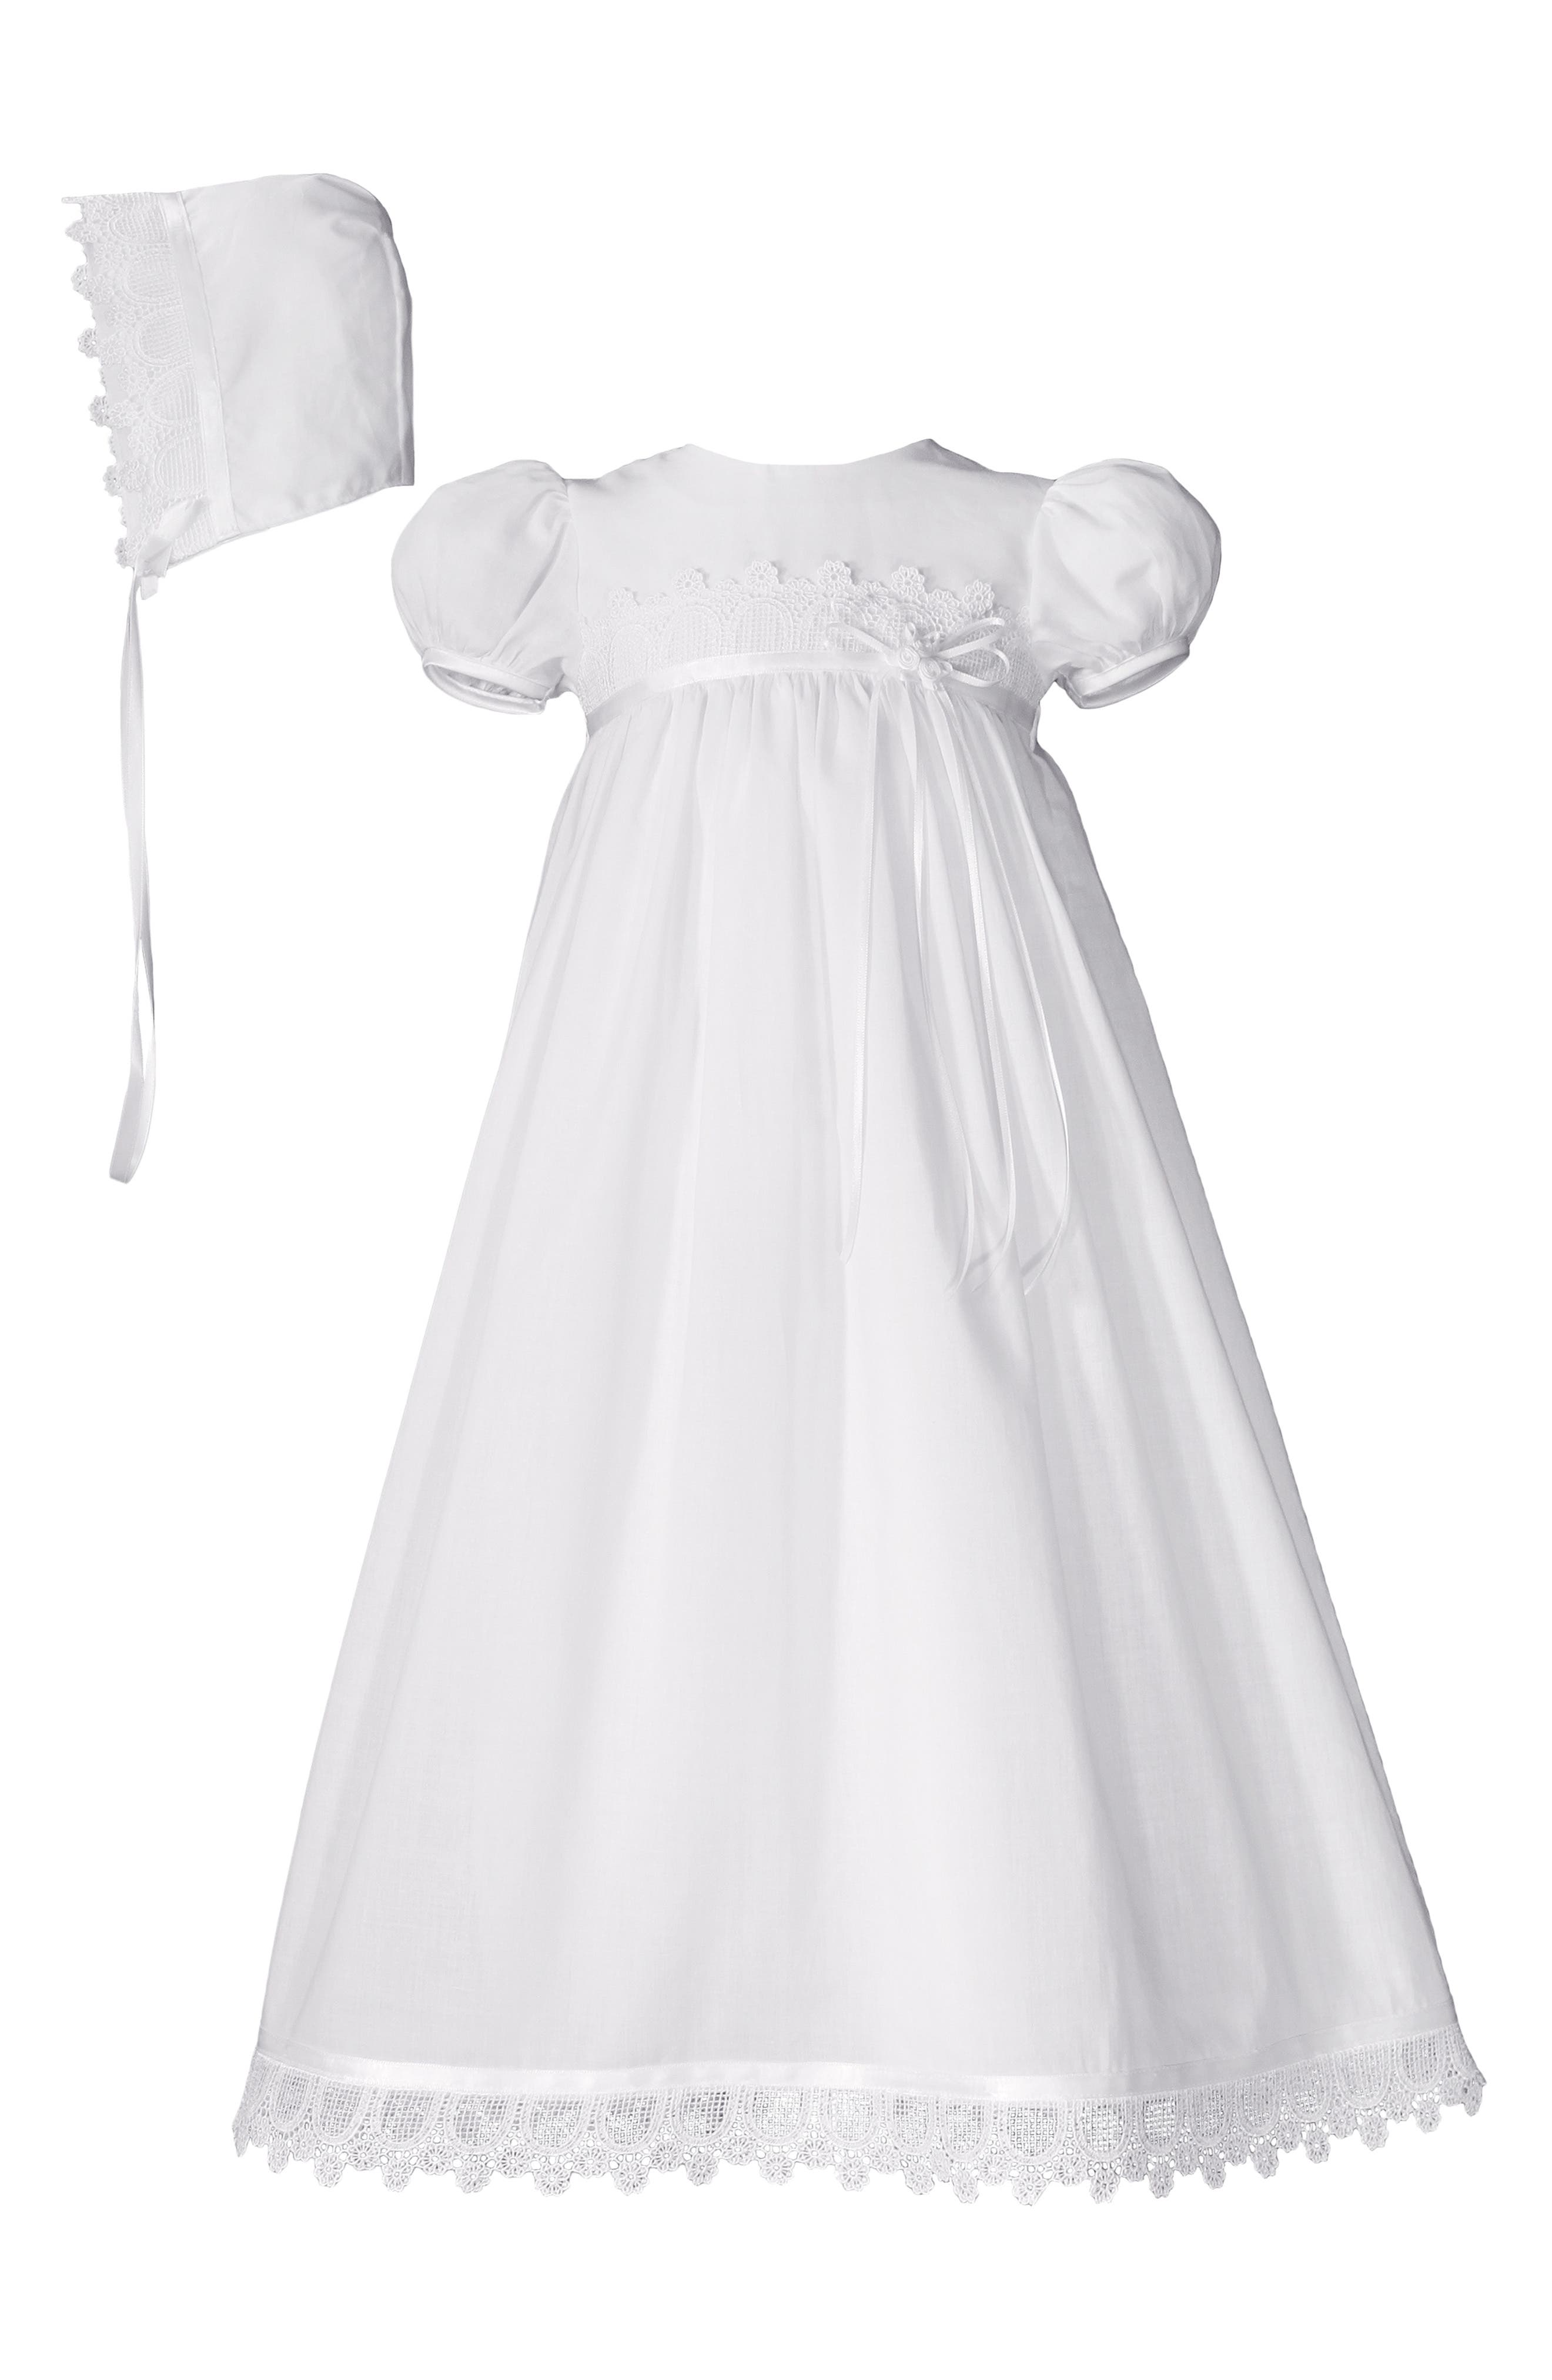 Christening Gowns ☀ Baptism Clothing ...